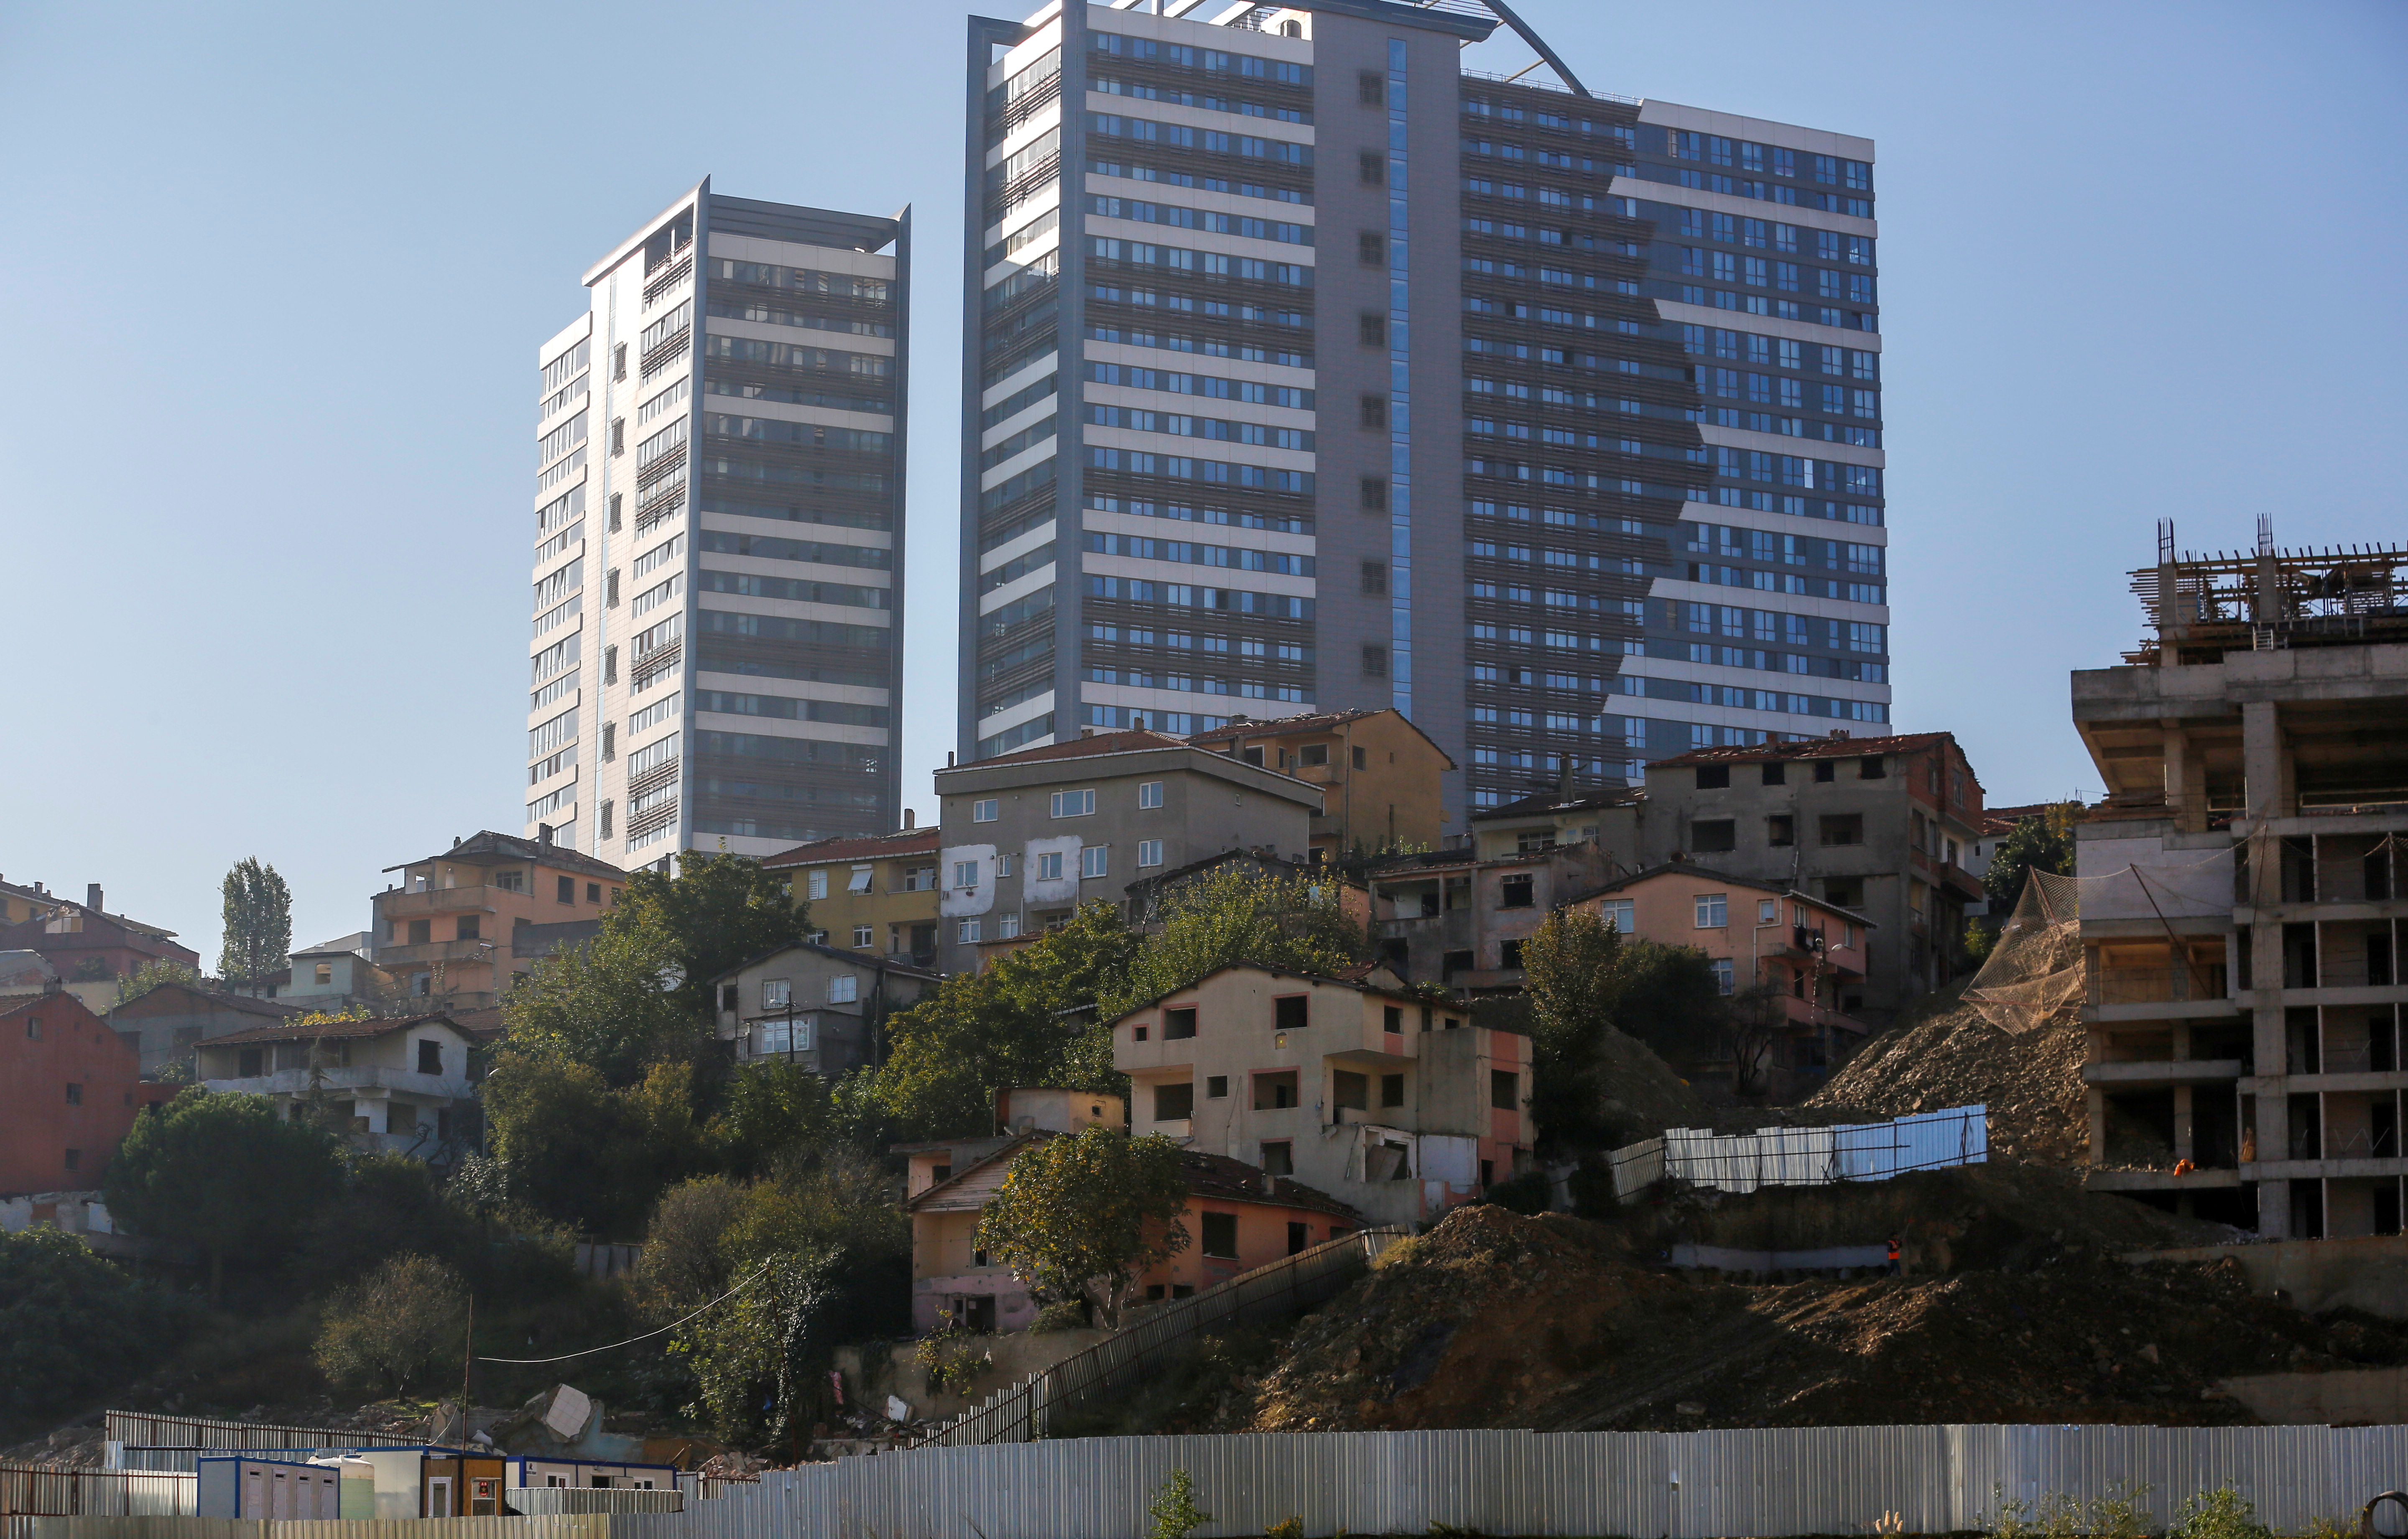 Abandoned houses are seen in front of brand new residential buildings at an urban transformation project area in Istanbul